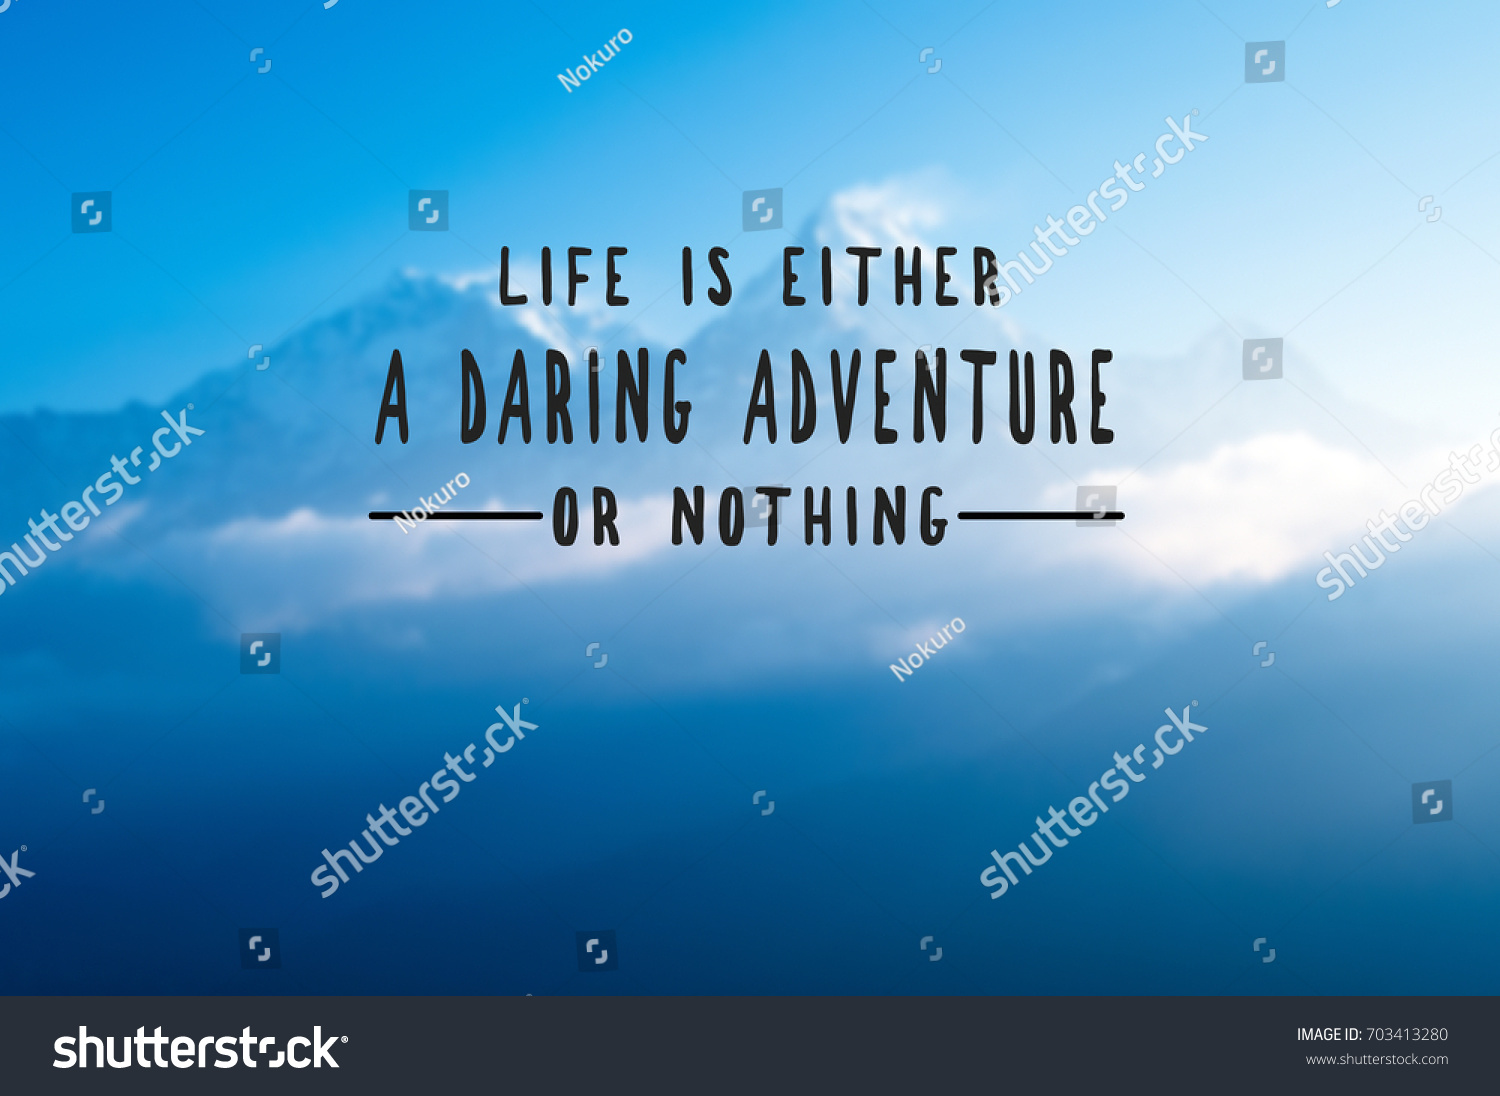 Inspirational quotes Life is either a daring adventure or nothing Retro styled blurry background